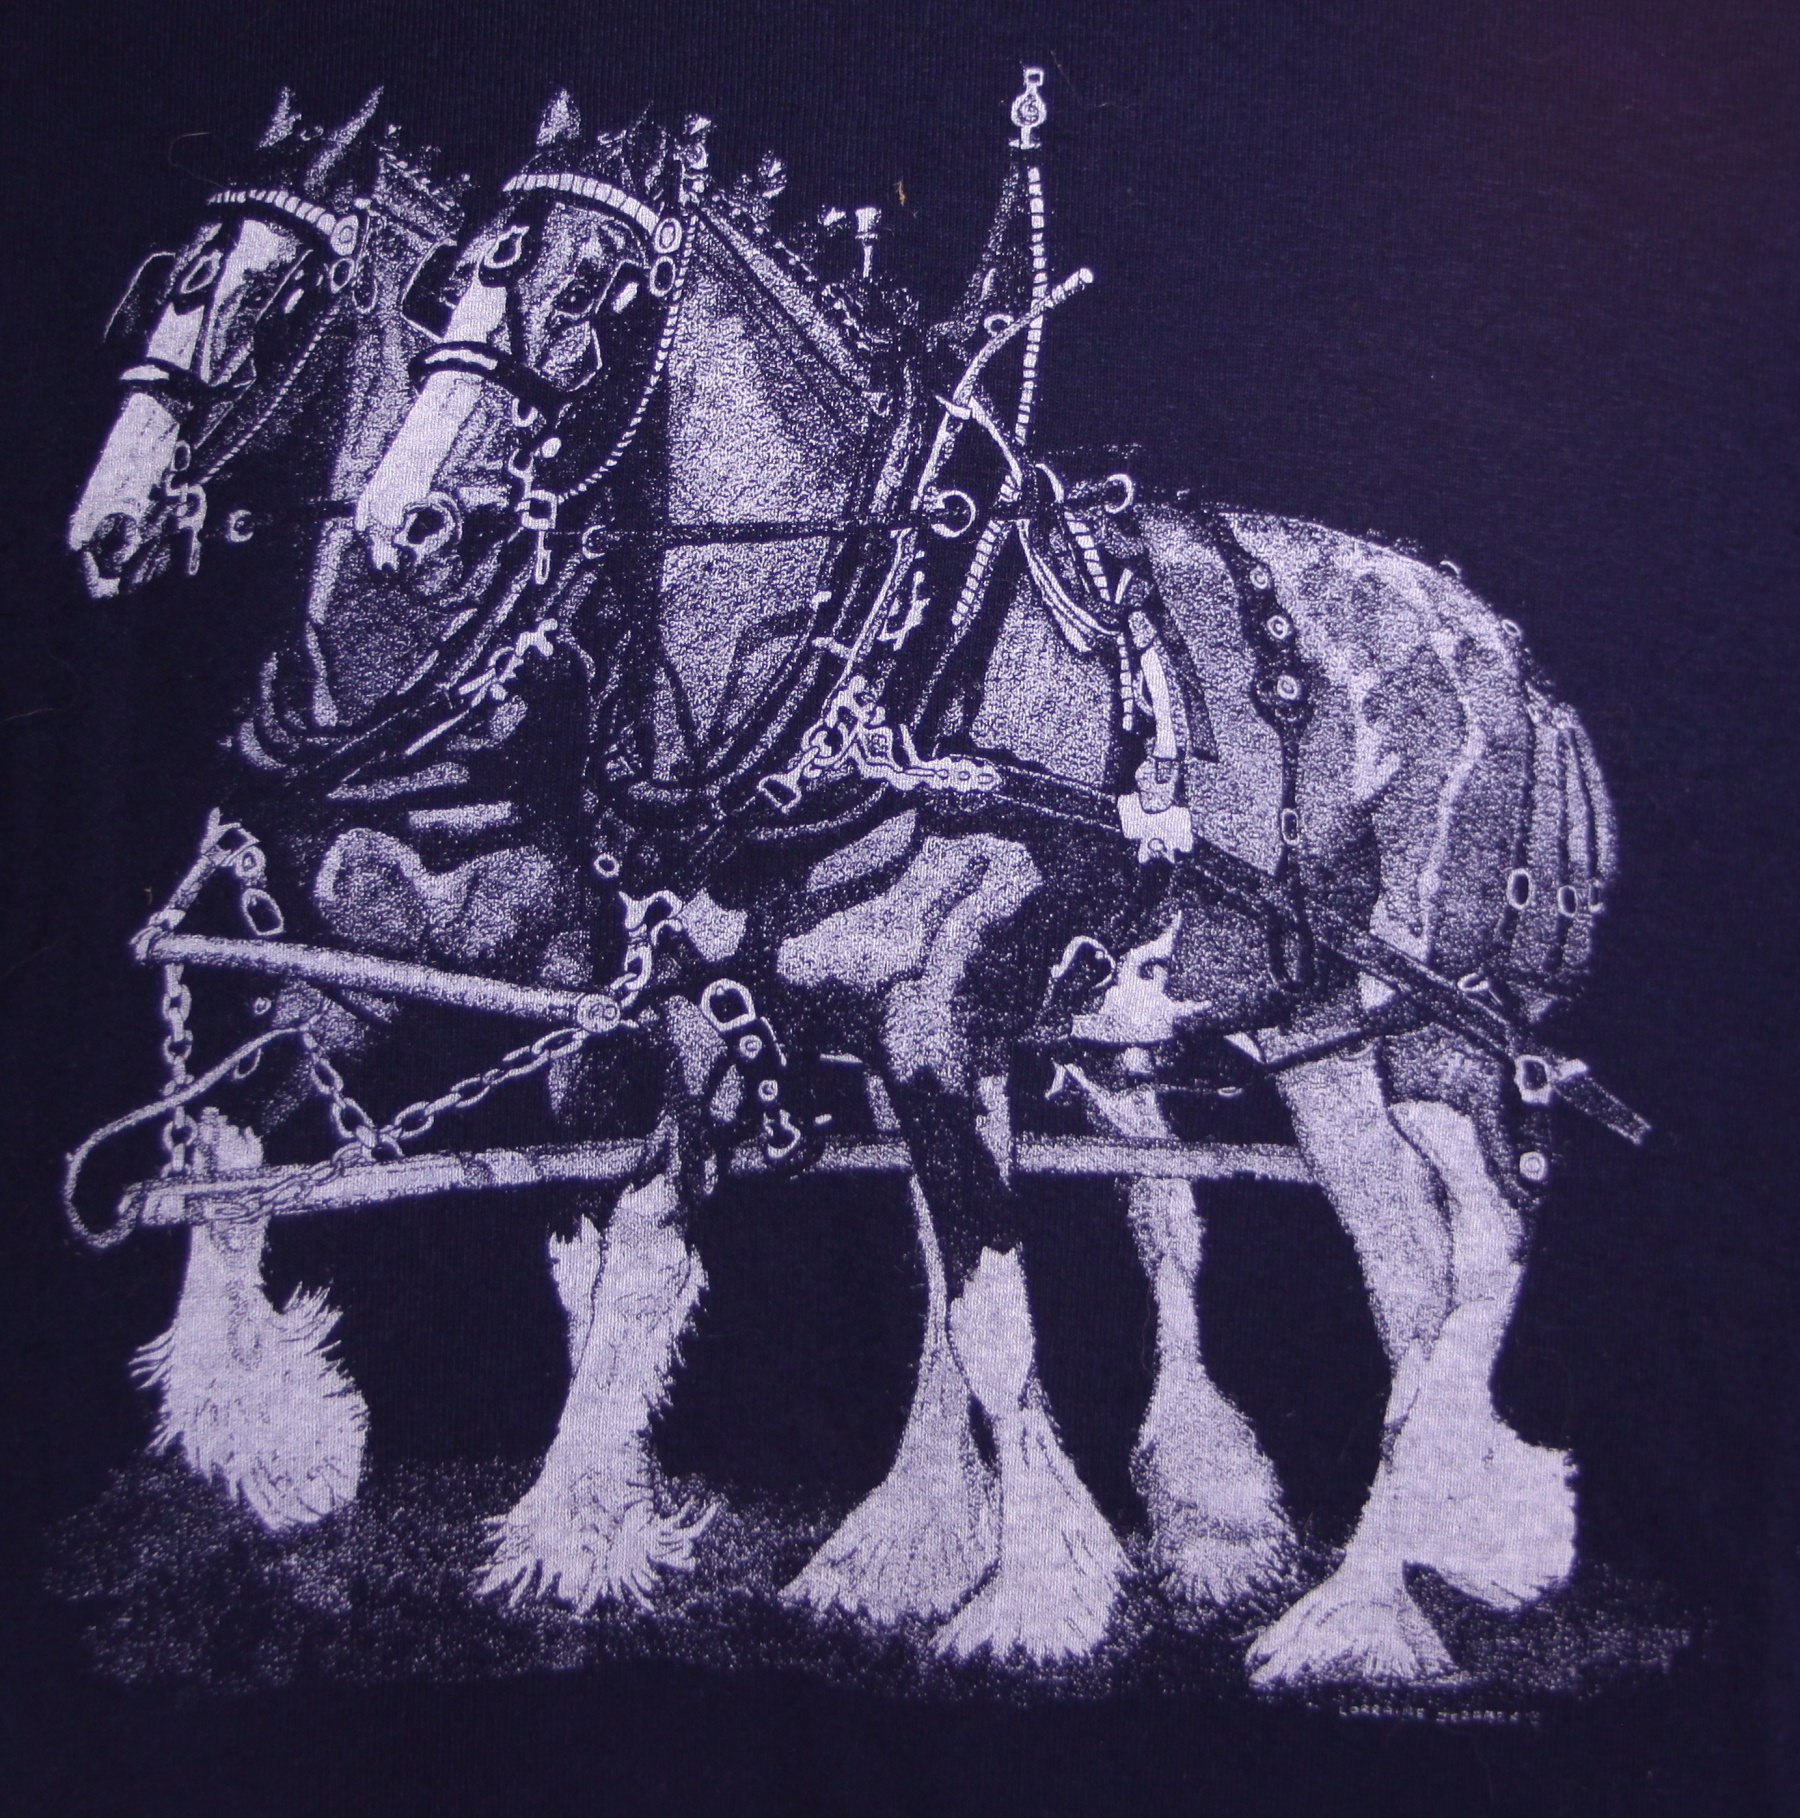 Clydesdale Team Draft Horse T-Shirt